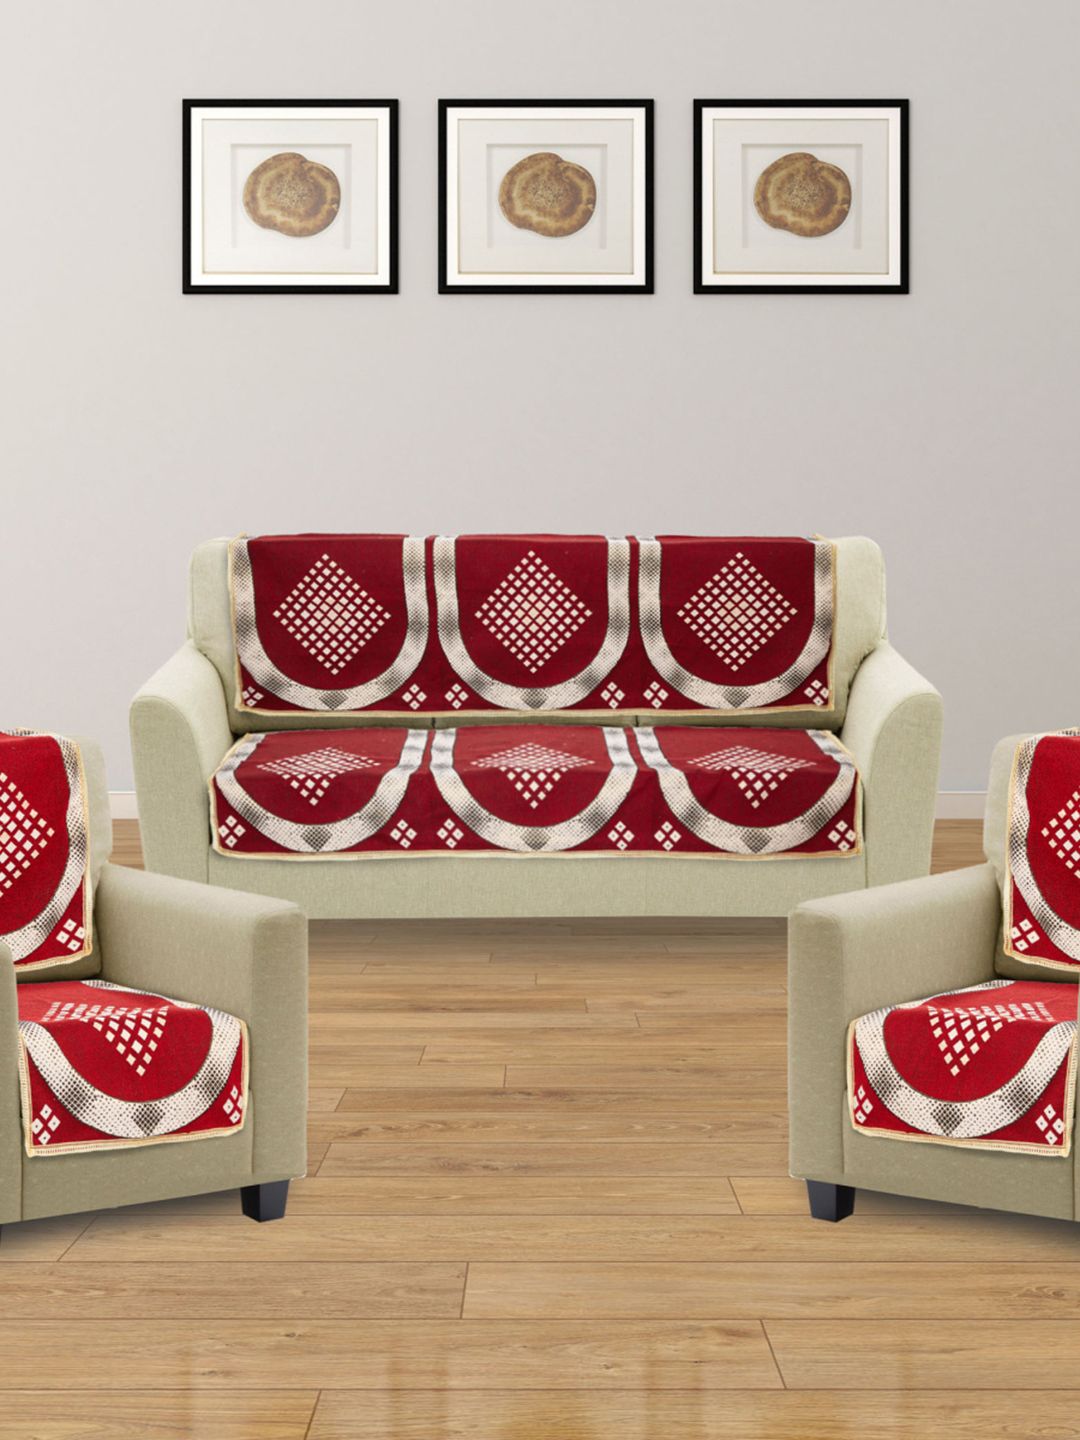 Home Centre Corsica Neon Red Textured Sofa Cover Set - 6 Pcs Price in India